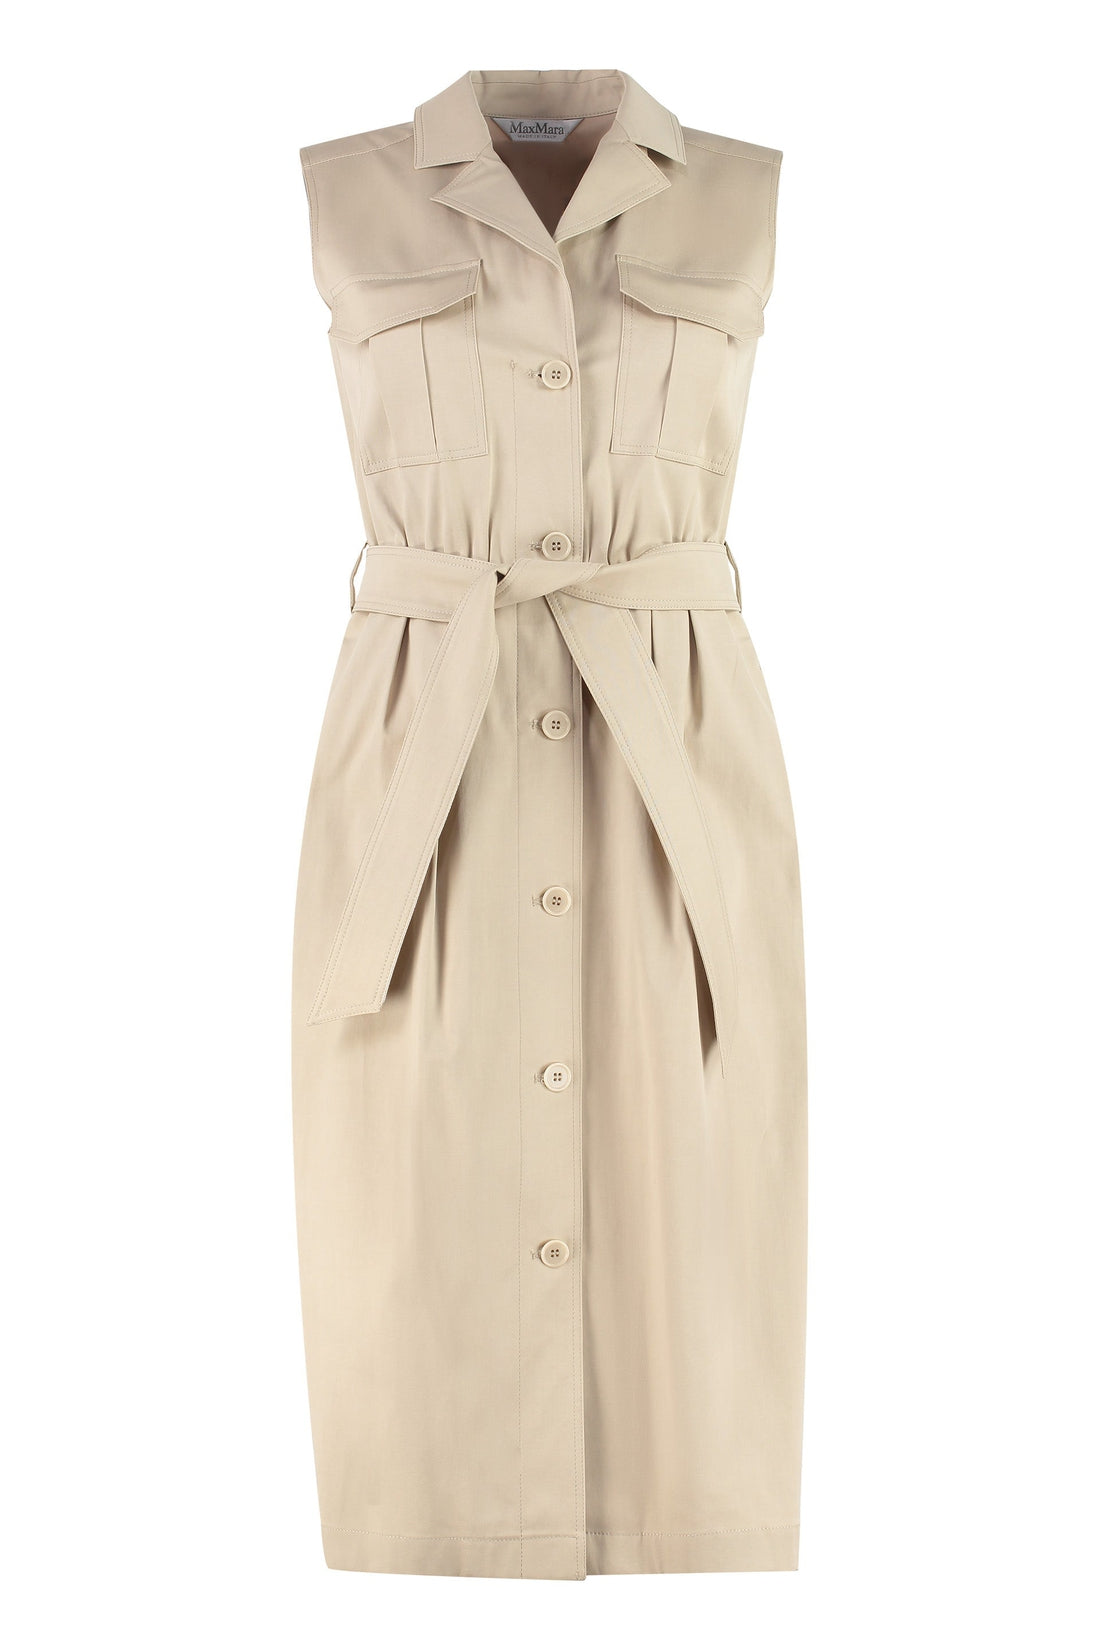 Max Mara-OUTLET-SALE-Elica belted cotton shirtdress-ARCHIVIST